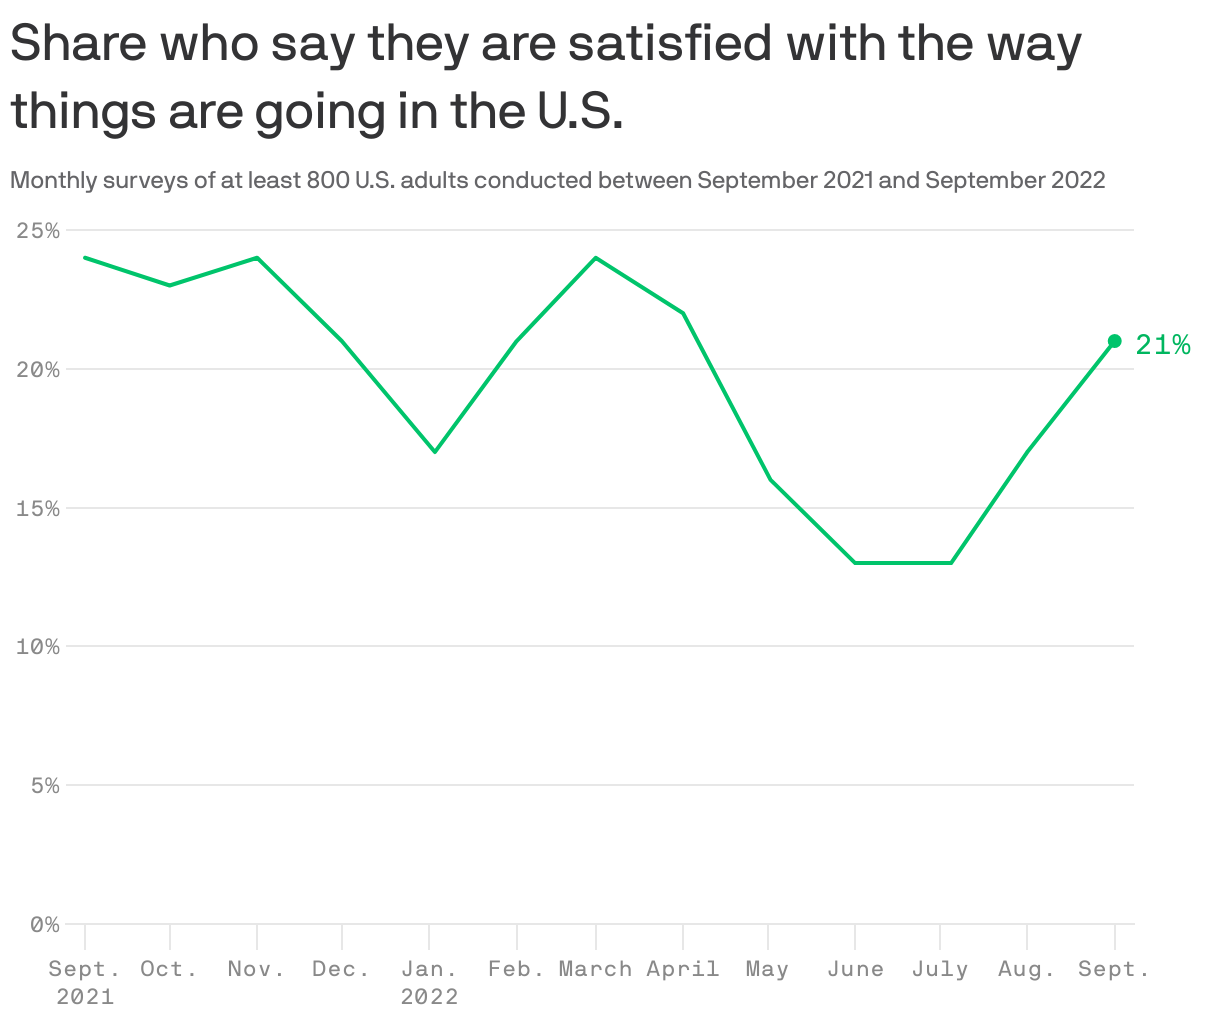 Share who say they are satisfied with the way things are going in the U.S.